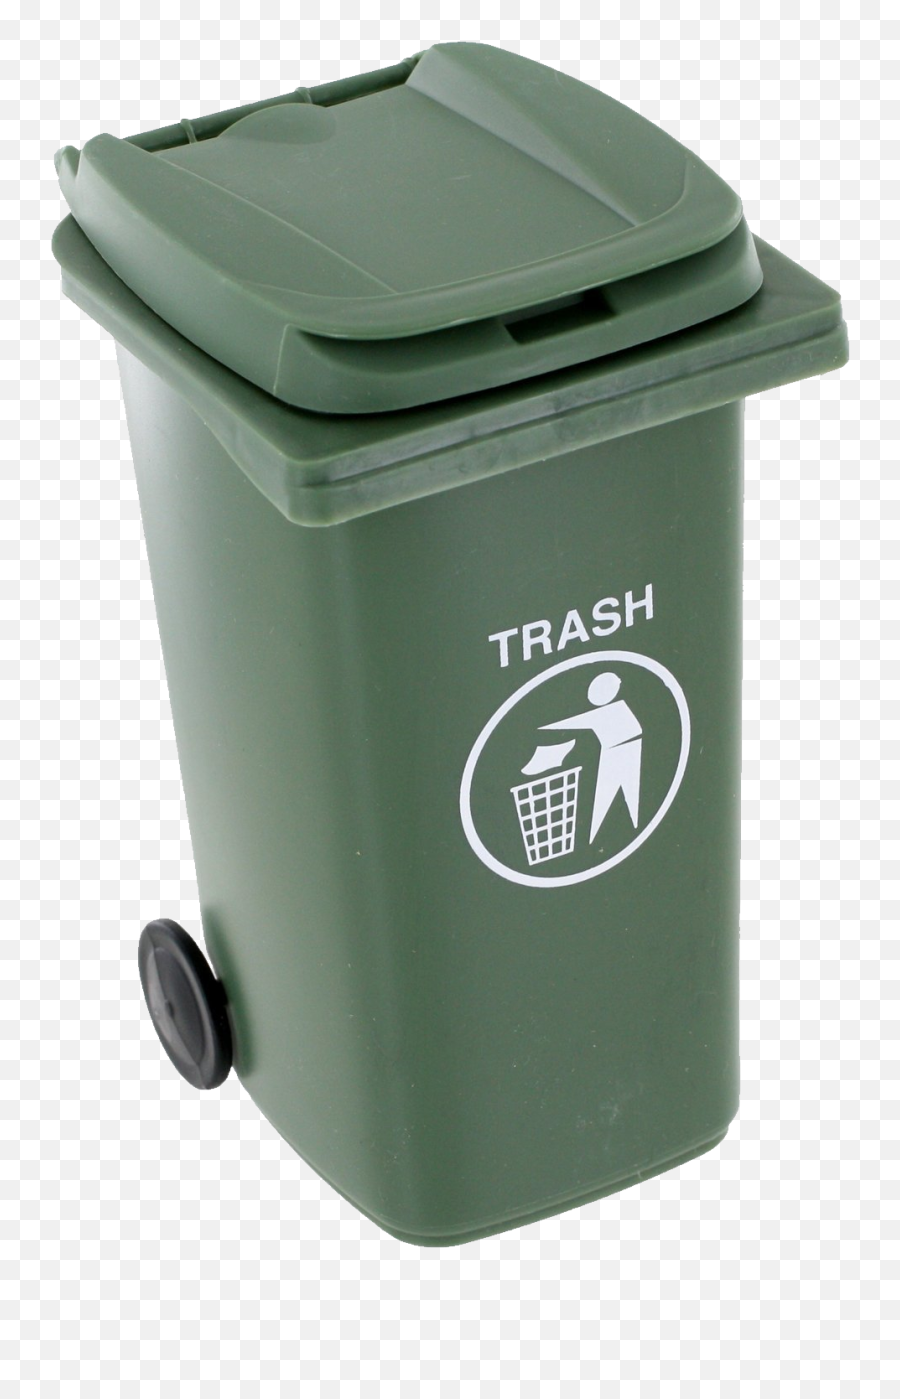 Waste Container Recycling Bin Plastic - Trash And Recycling Bin Png,Trash Bin Png